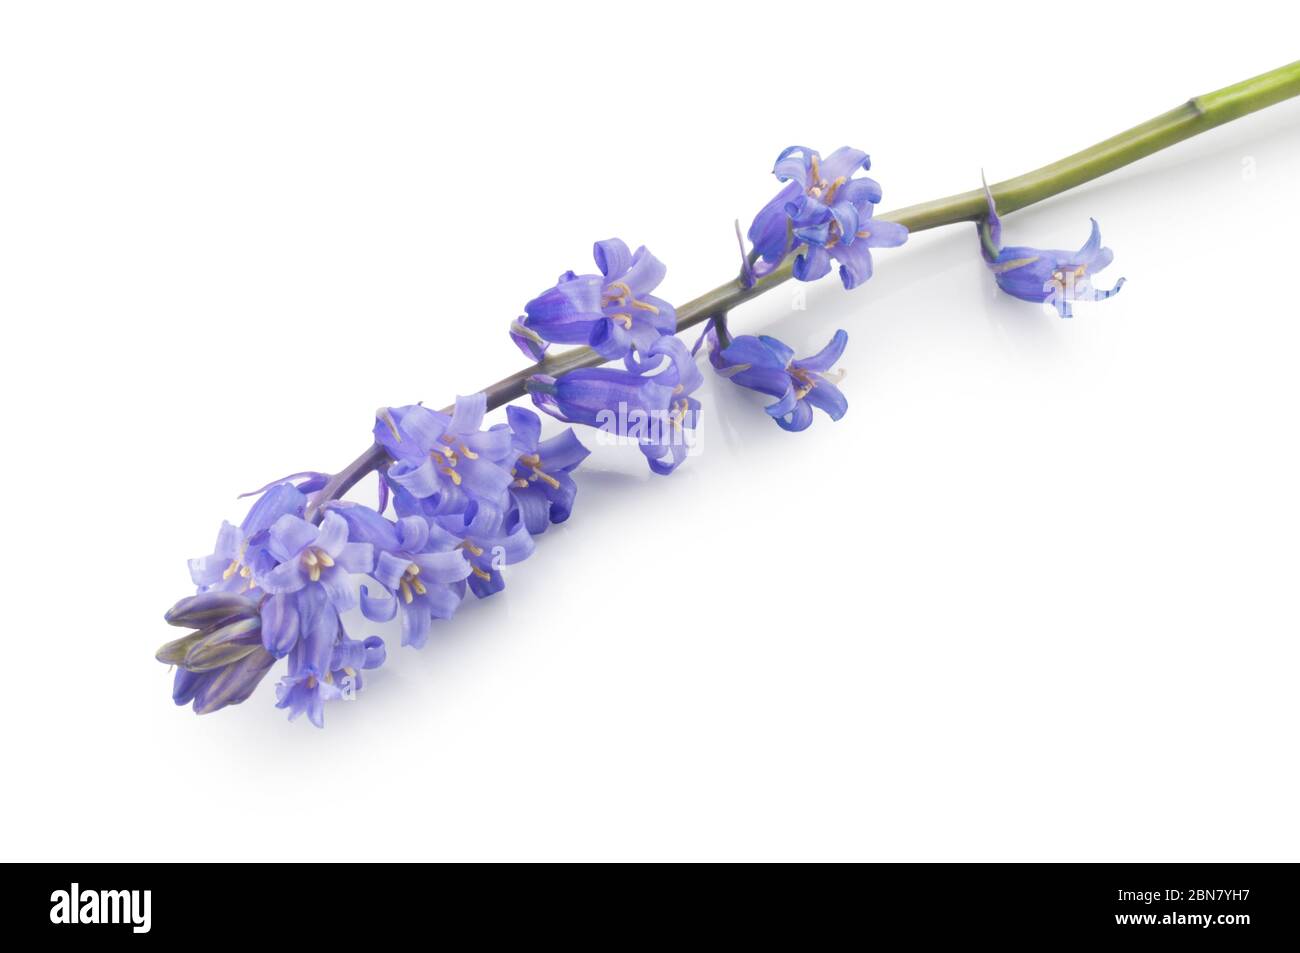 Studio shot of Common Bluebells, Hyacinthoides non-scripta, cut out against a white background - John Gollop Stock Photo